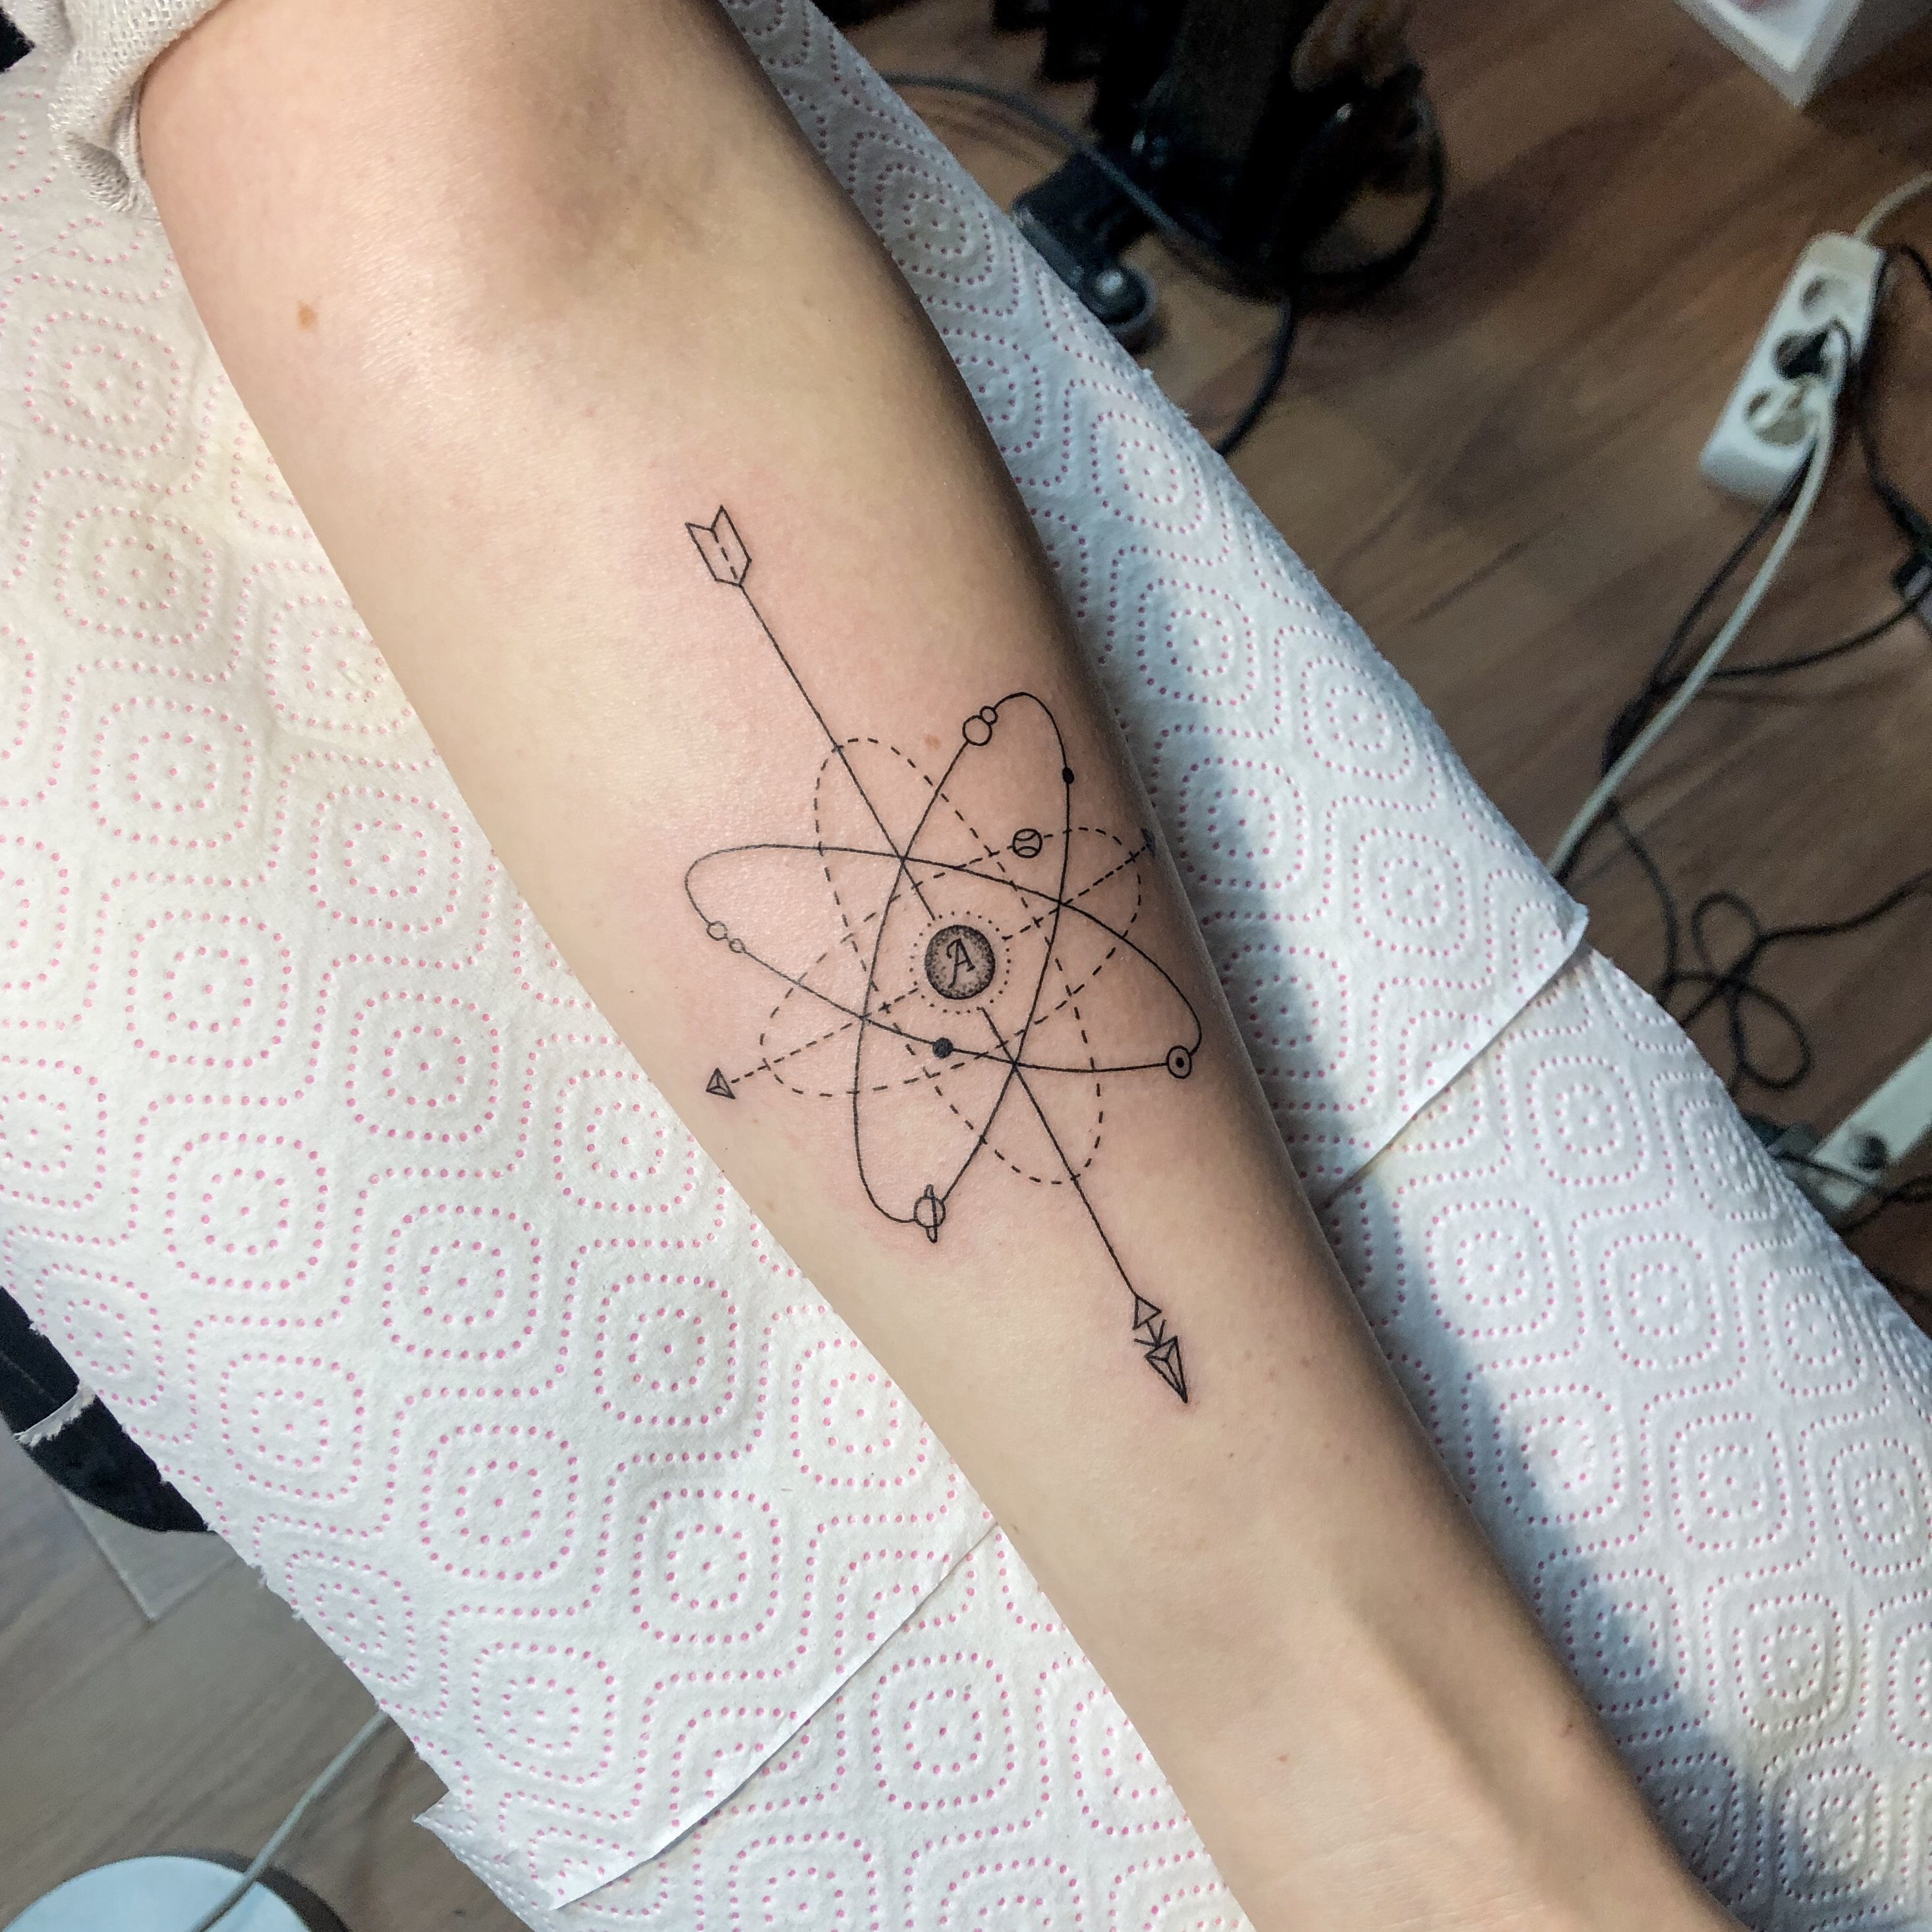 Stylized carbon atom by Scary Carrie at BDC Tattoo in Lawrence KS  r tattoos